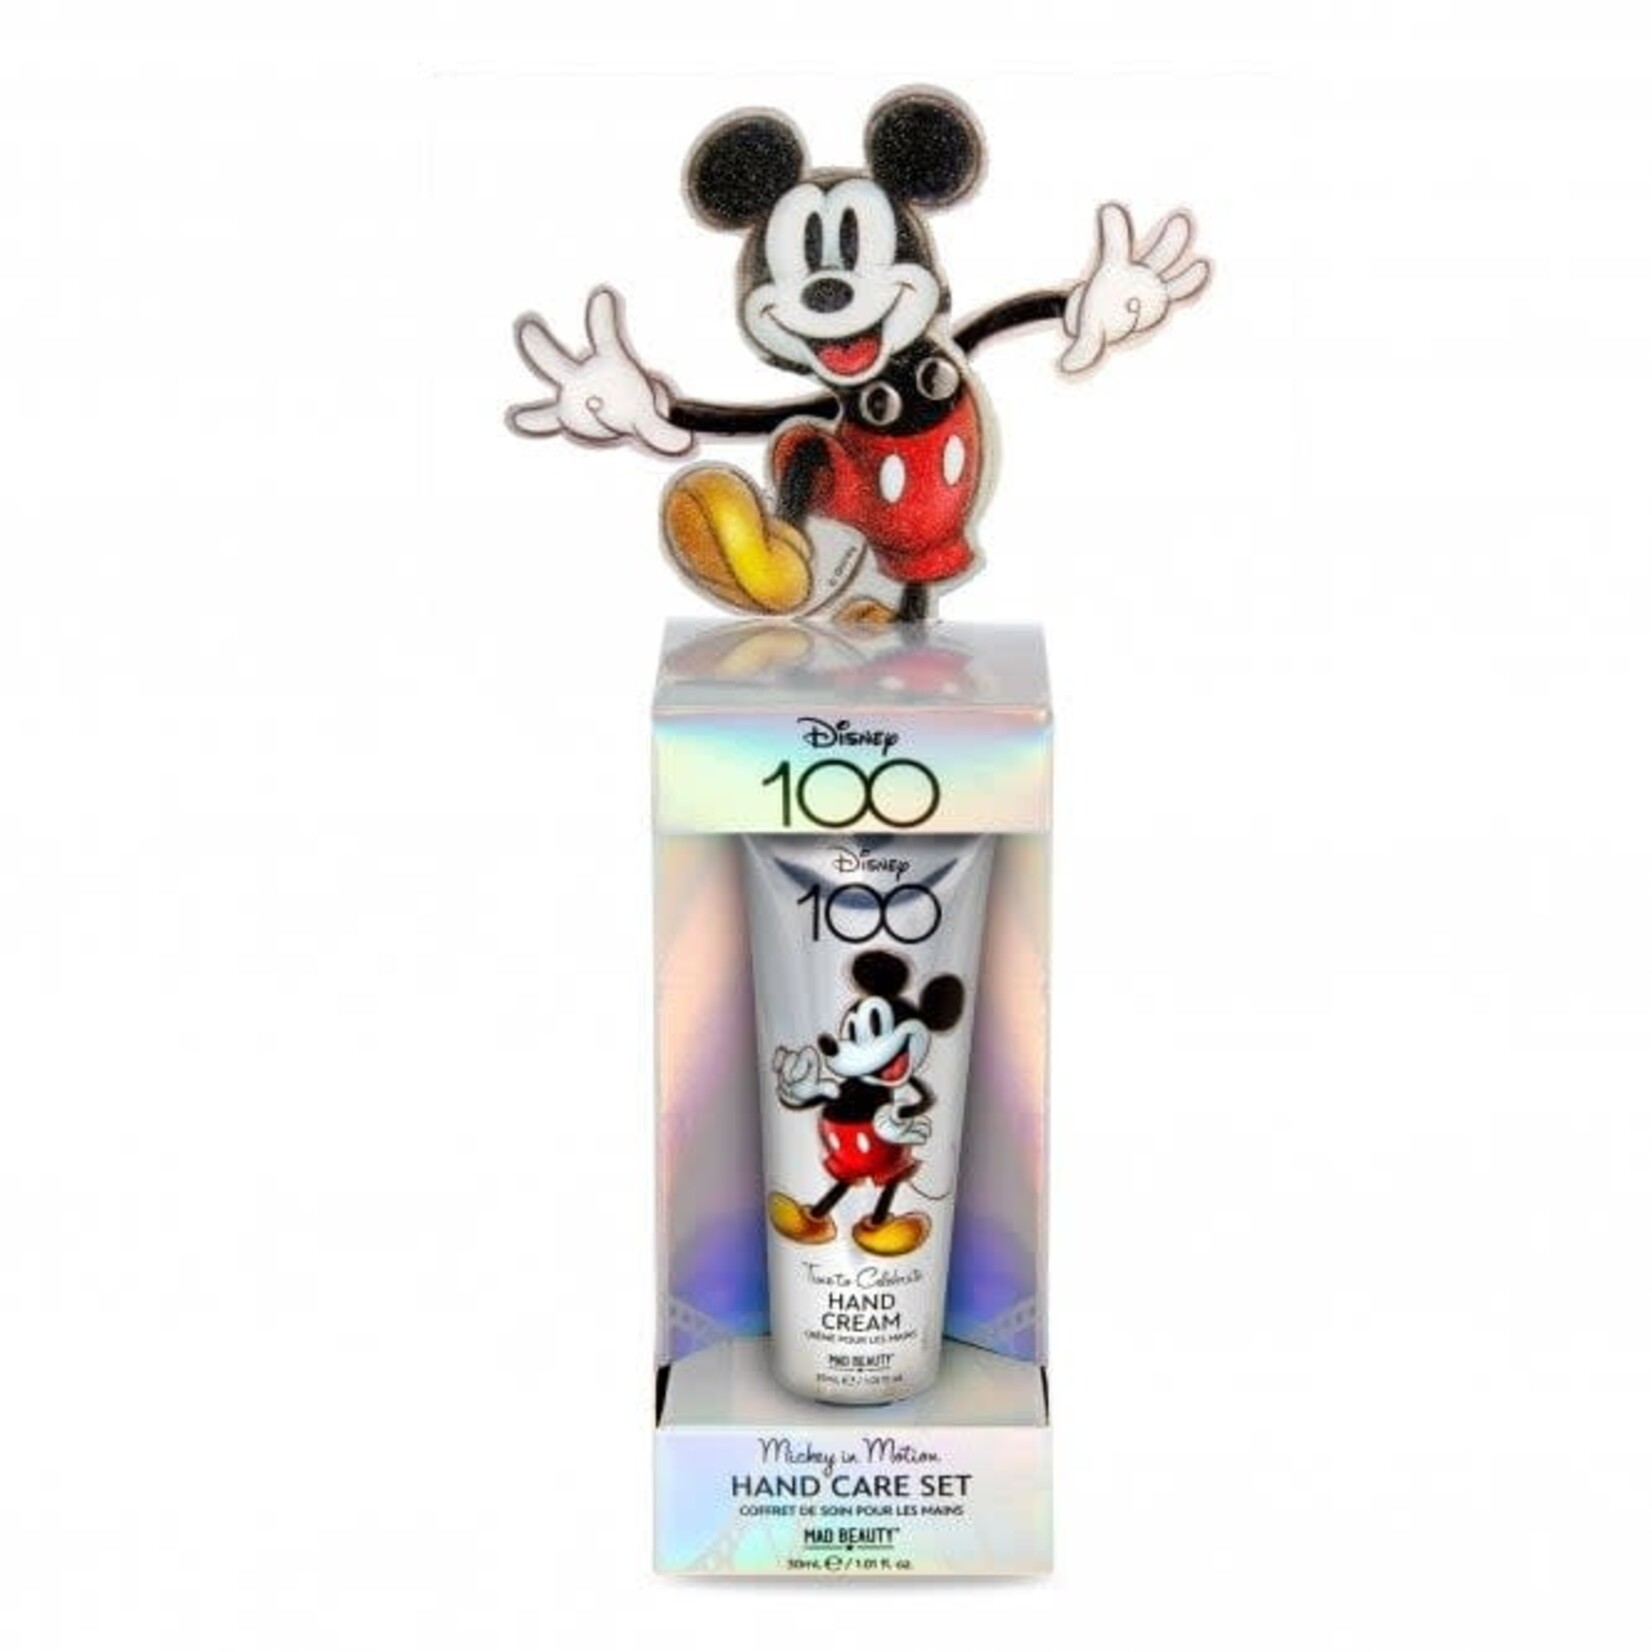 MICKEY MOUSE HAND CARE SET